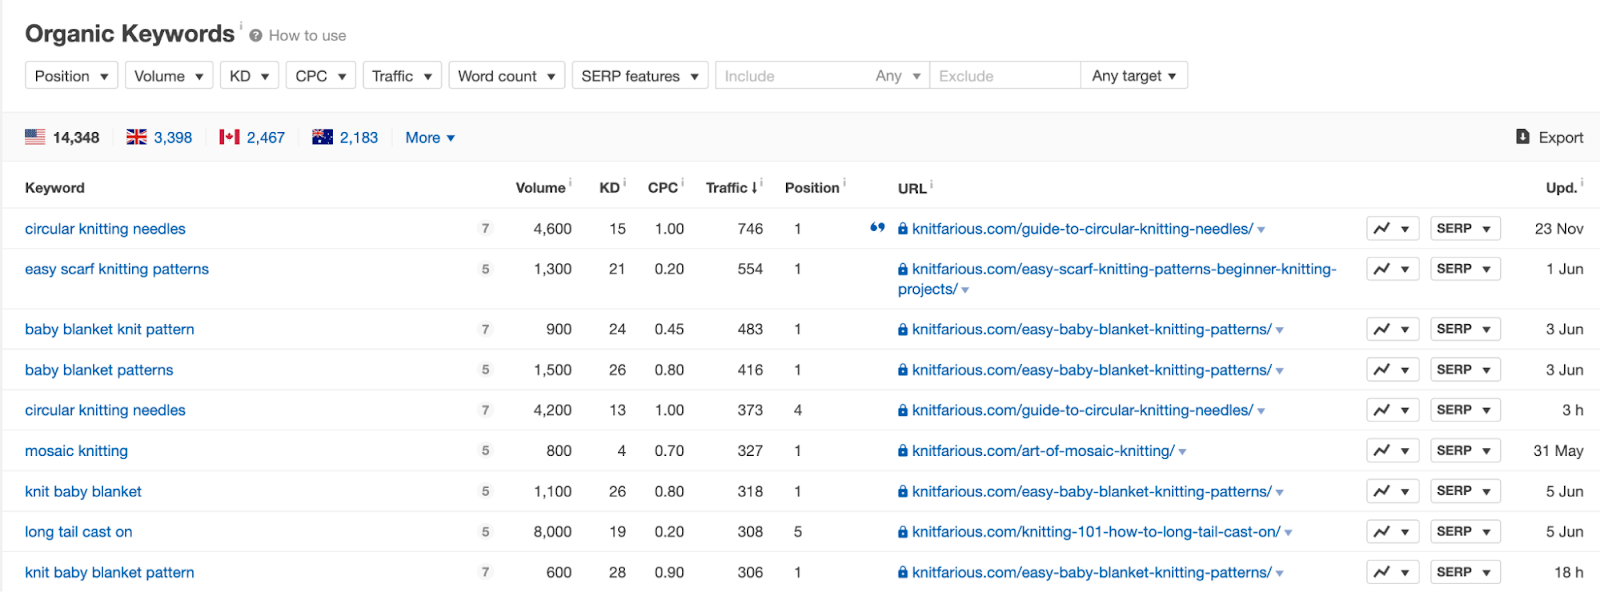 Organic Keywords report results in Ahrefs' Site Explorer 